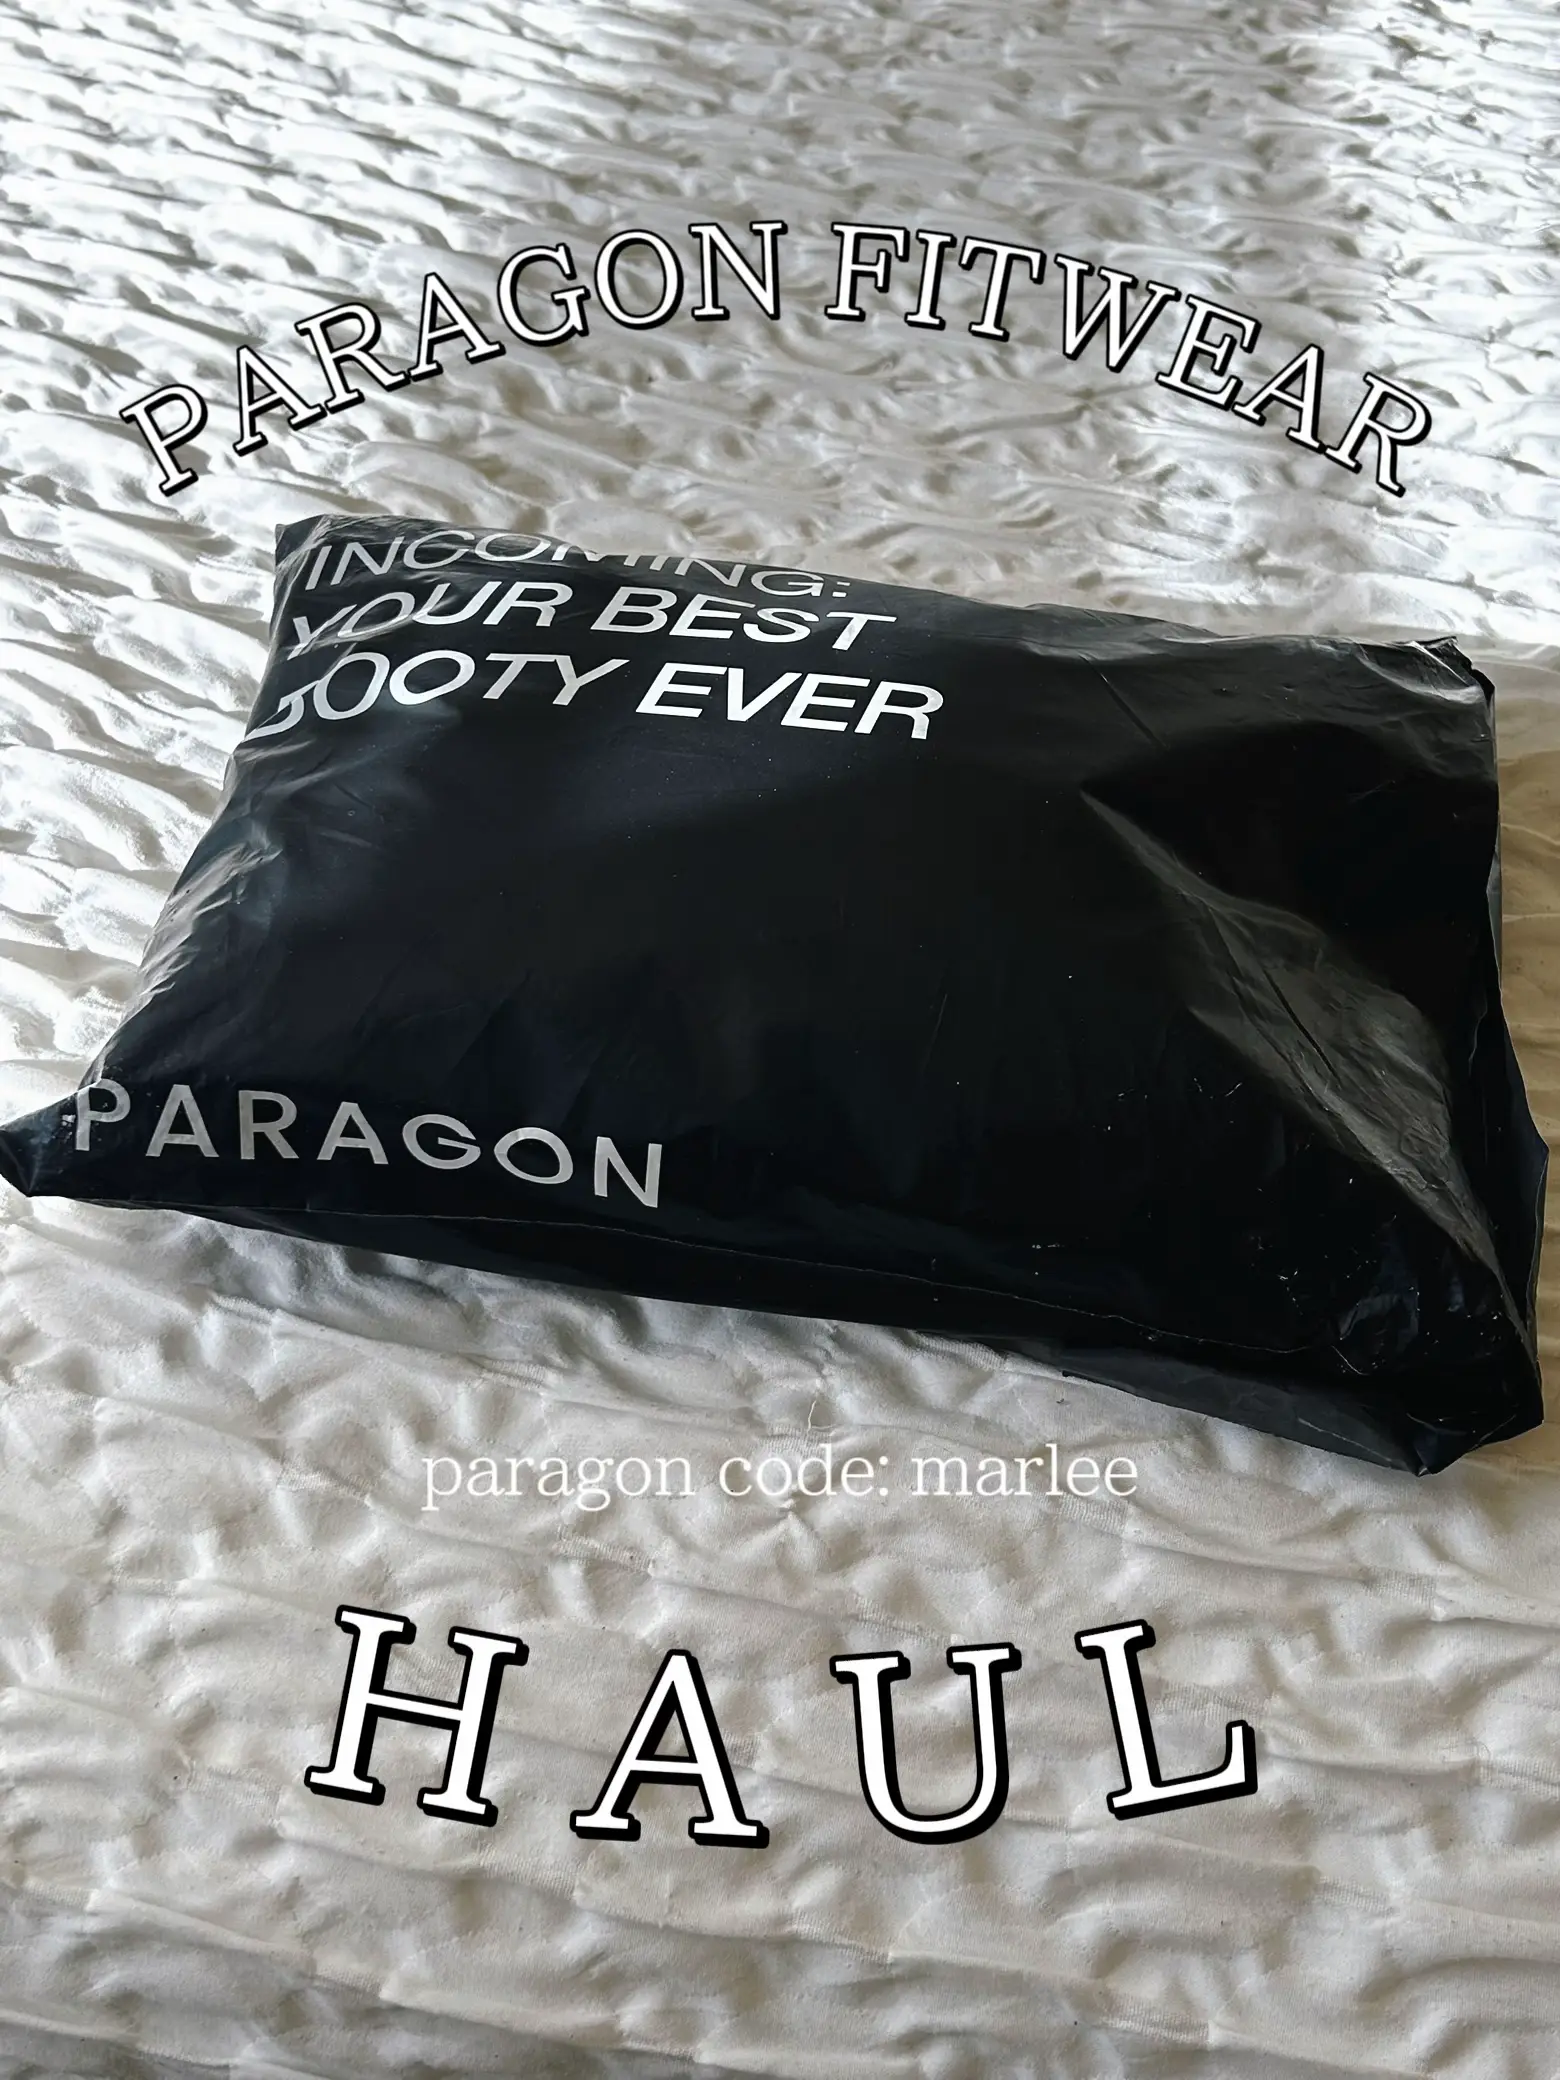 24 HRS OUT⏰ - Paragon Fitwear